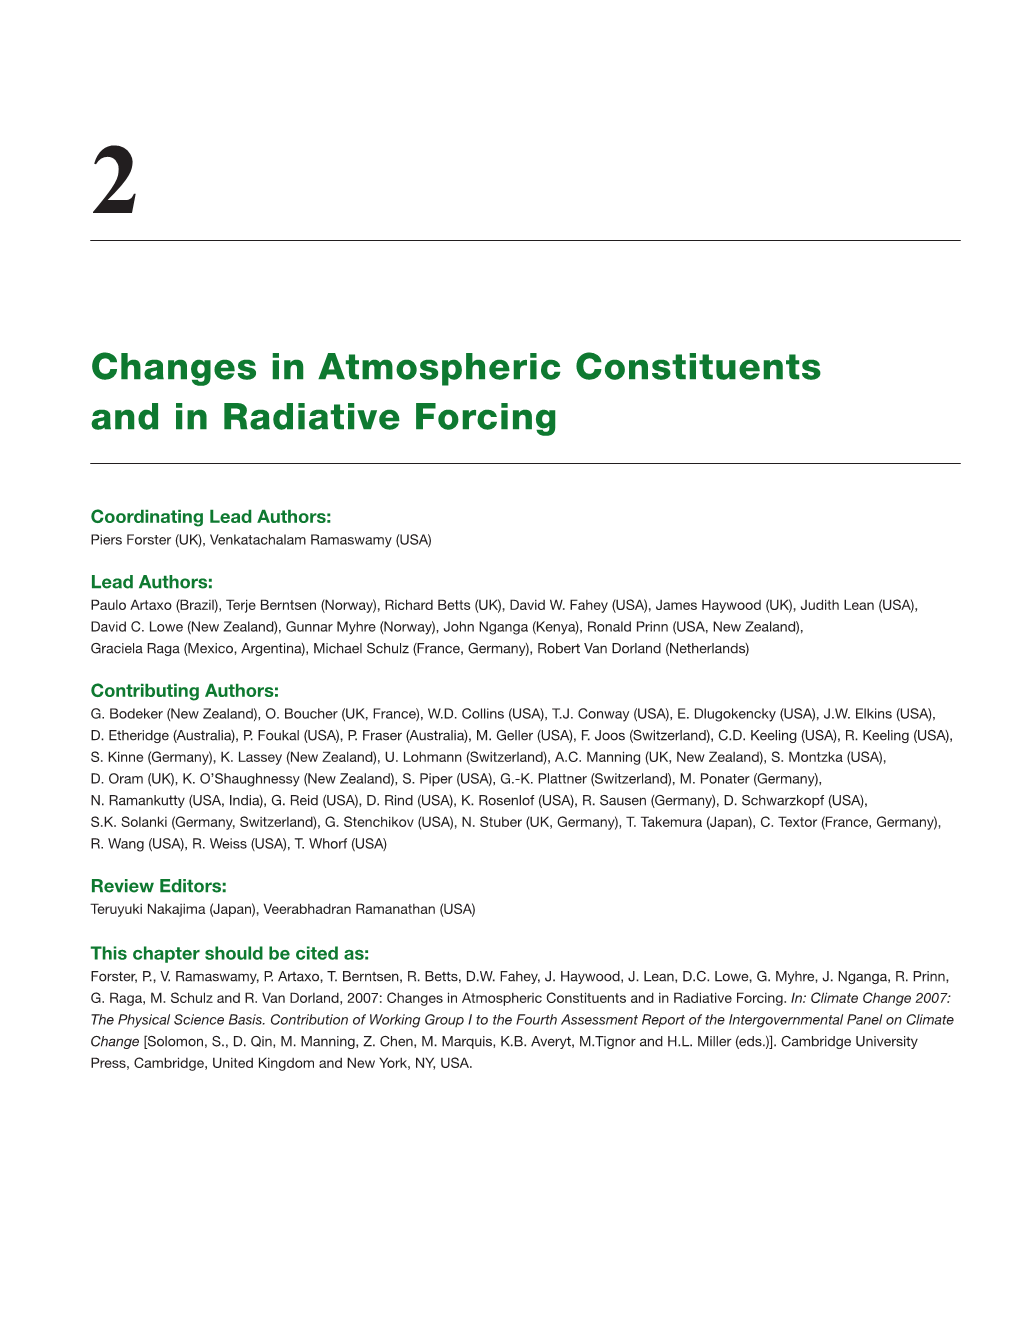 Changes in Atmospheric Constituents and in Radiative Forcing